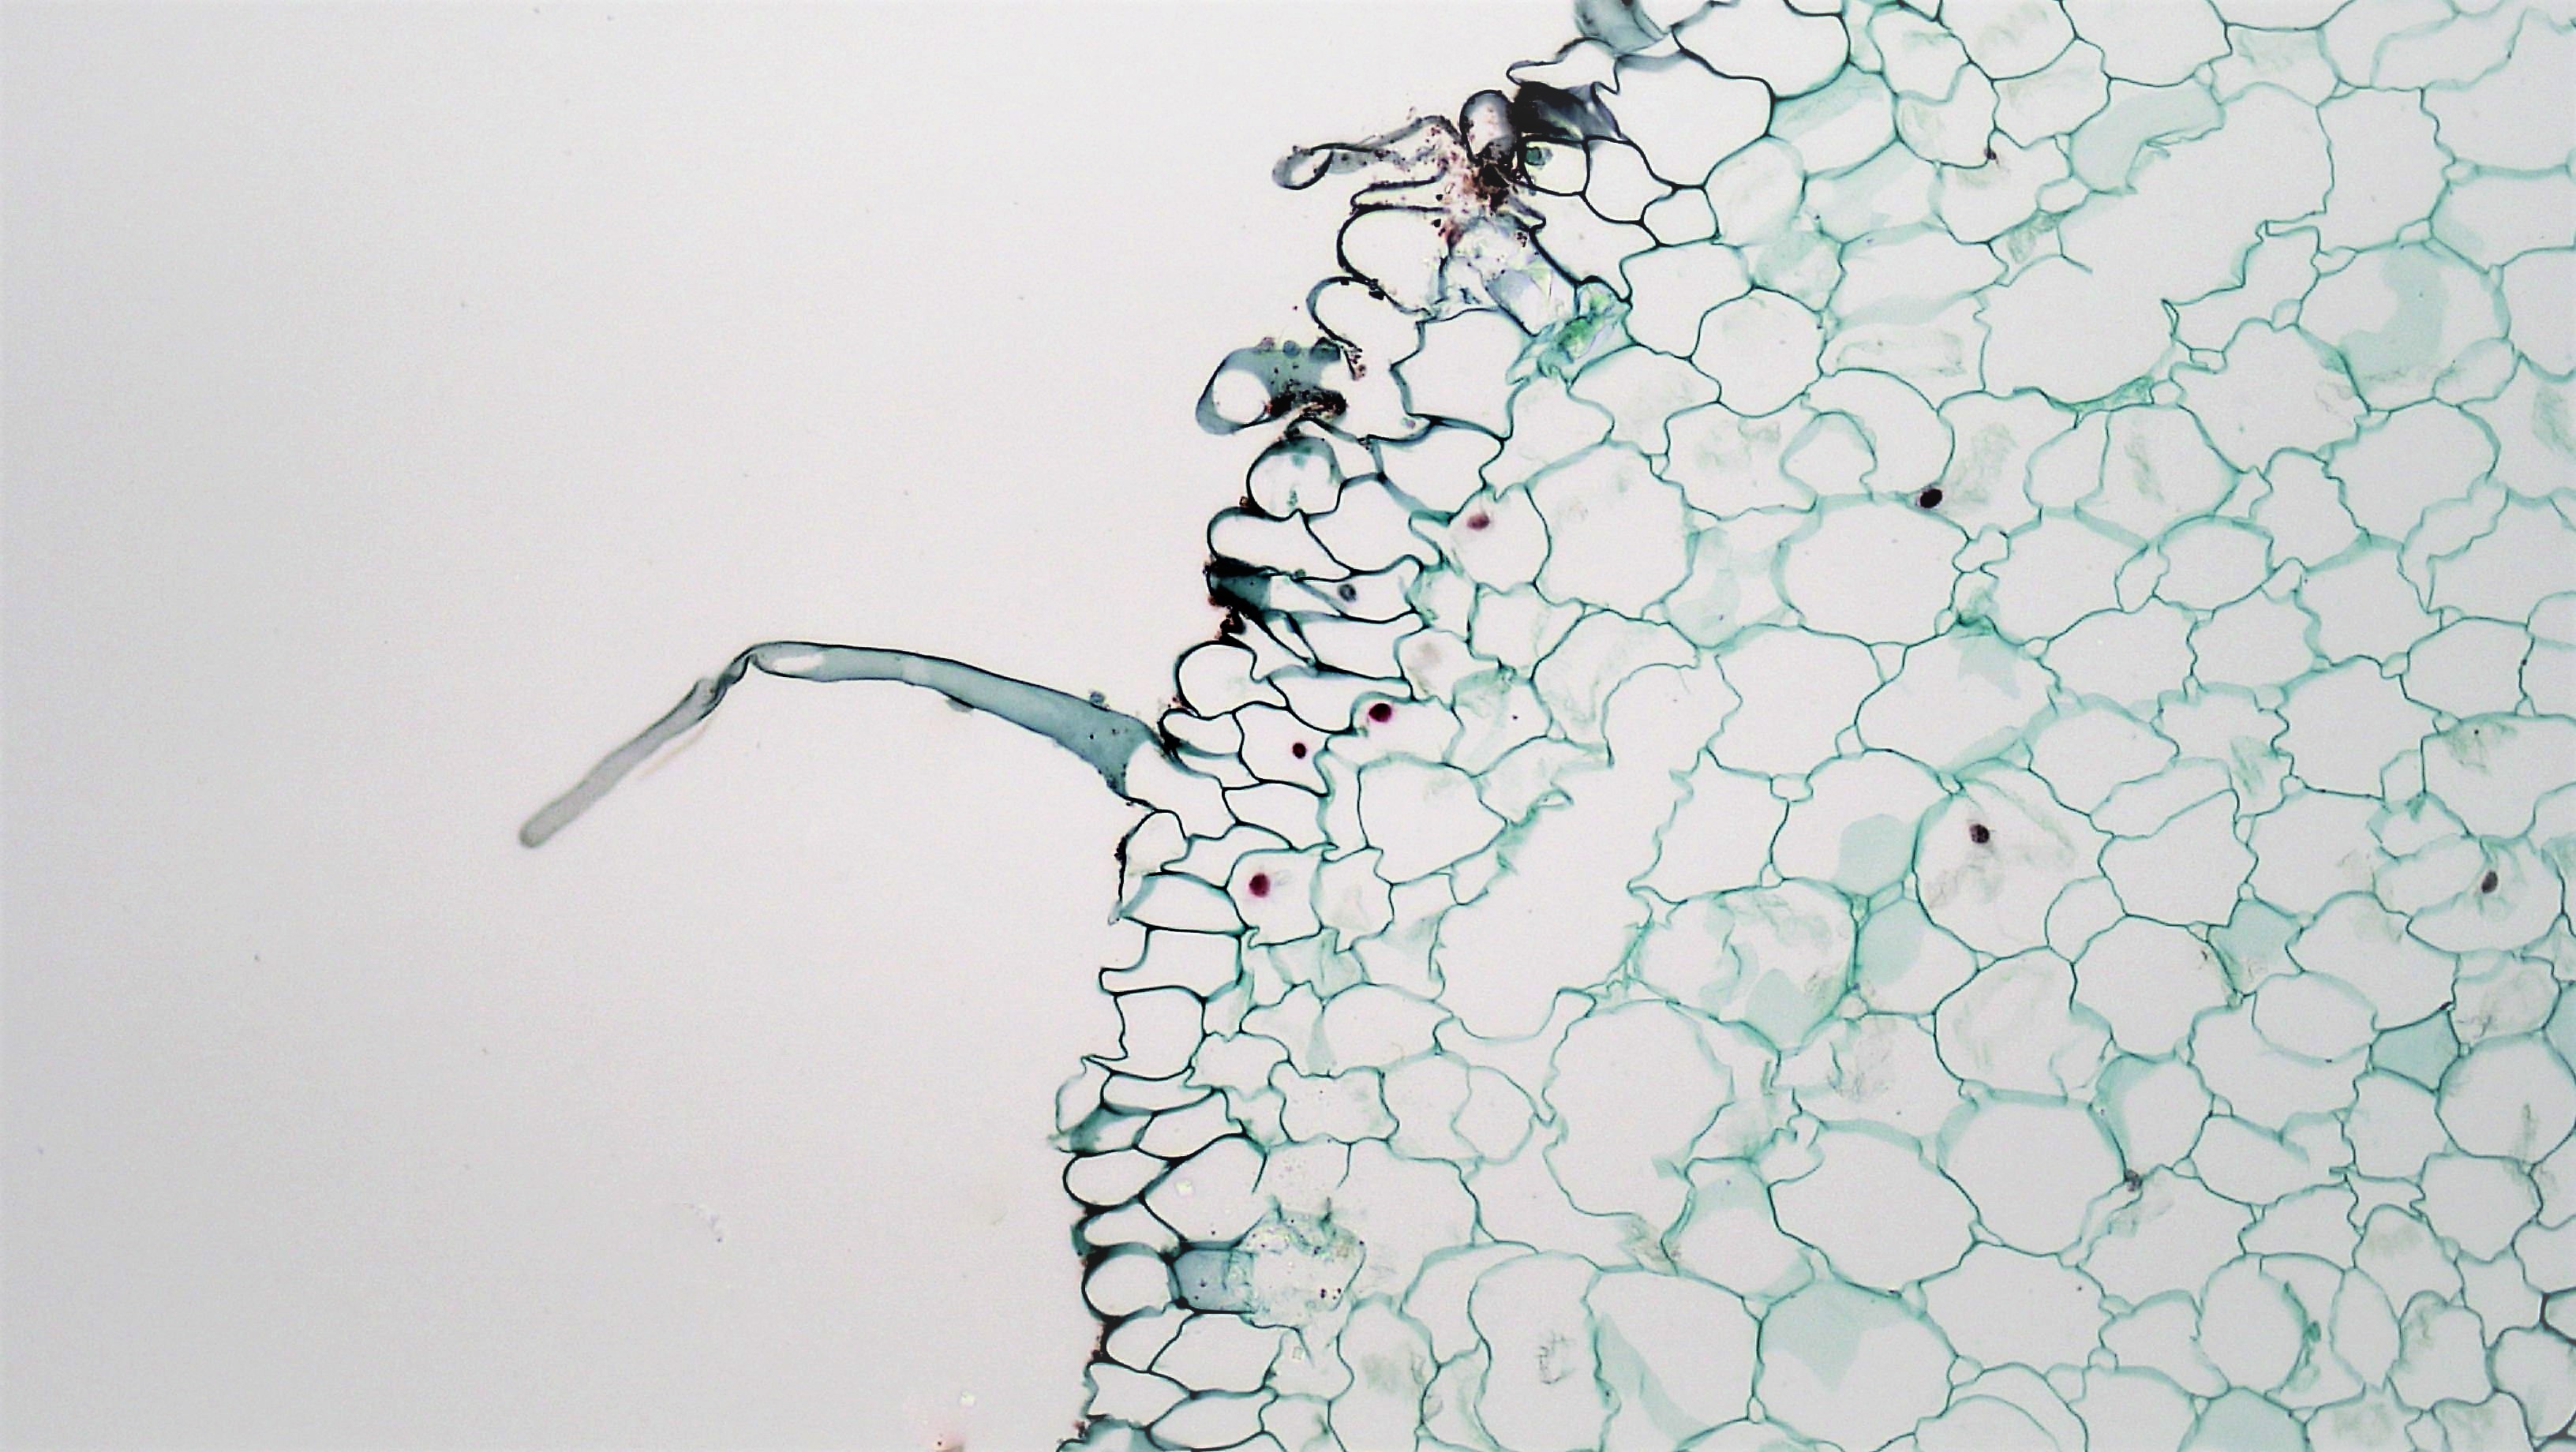 Microscope image of a plant root. The image is a slice through the root (a transverse section). Only part of the root is visible within the frame of the image. The cell wall of each individual cell can be seen. No cell contents are visible within the cells. One cell has a long thin extension that sticks out from the root. This is a root hair and the cell that has it is a root hair cell.